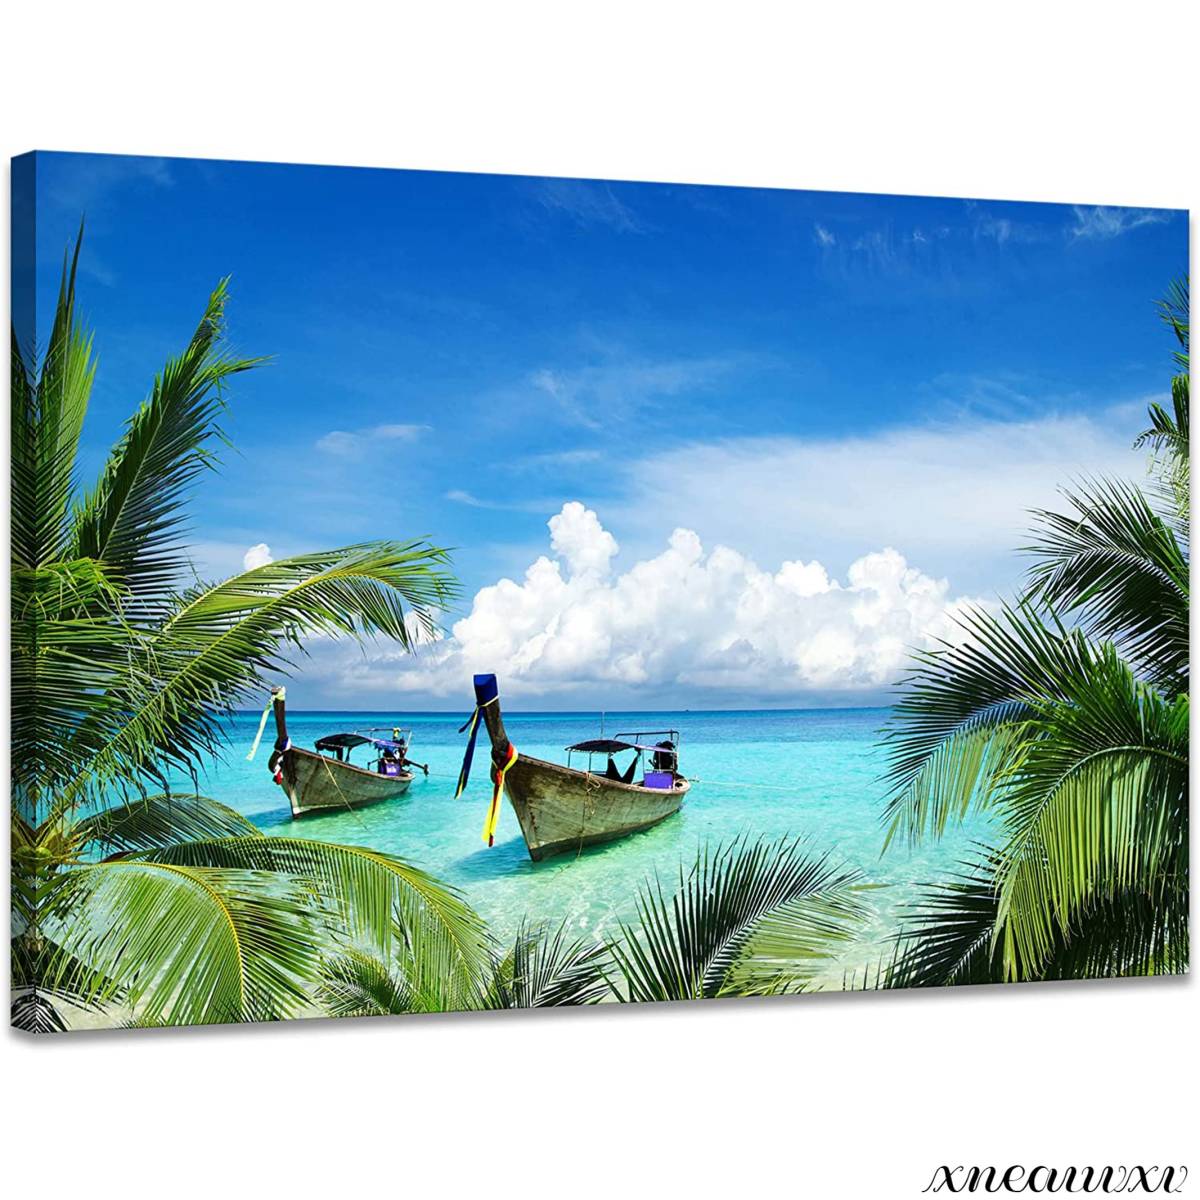 Beautiful sea, art panel, nature, landscape, white clouds, interior, wall hanging, room decoration, decorative painting, canvas, painting, stylish, overseas, art, appreciation, redecoration, interior, Artwork, Painting, graphic